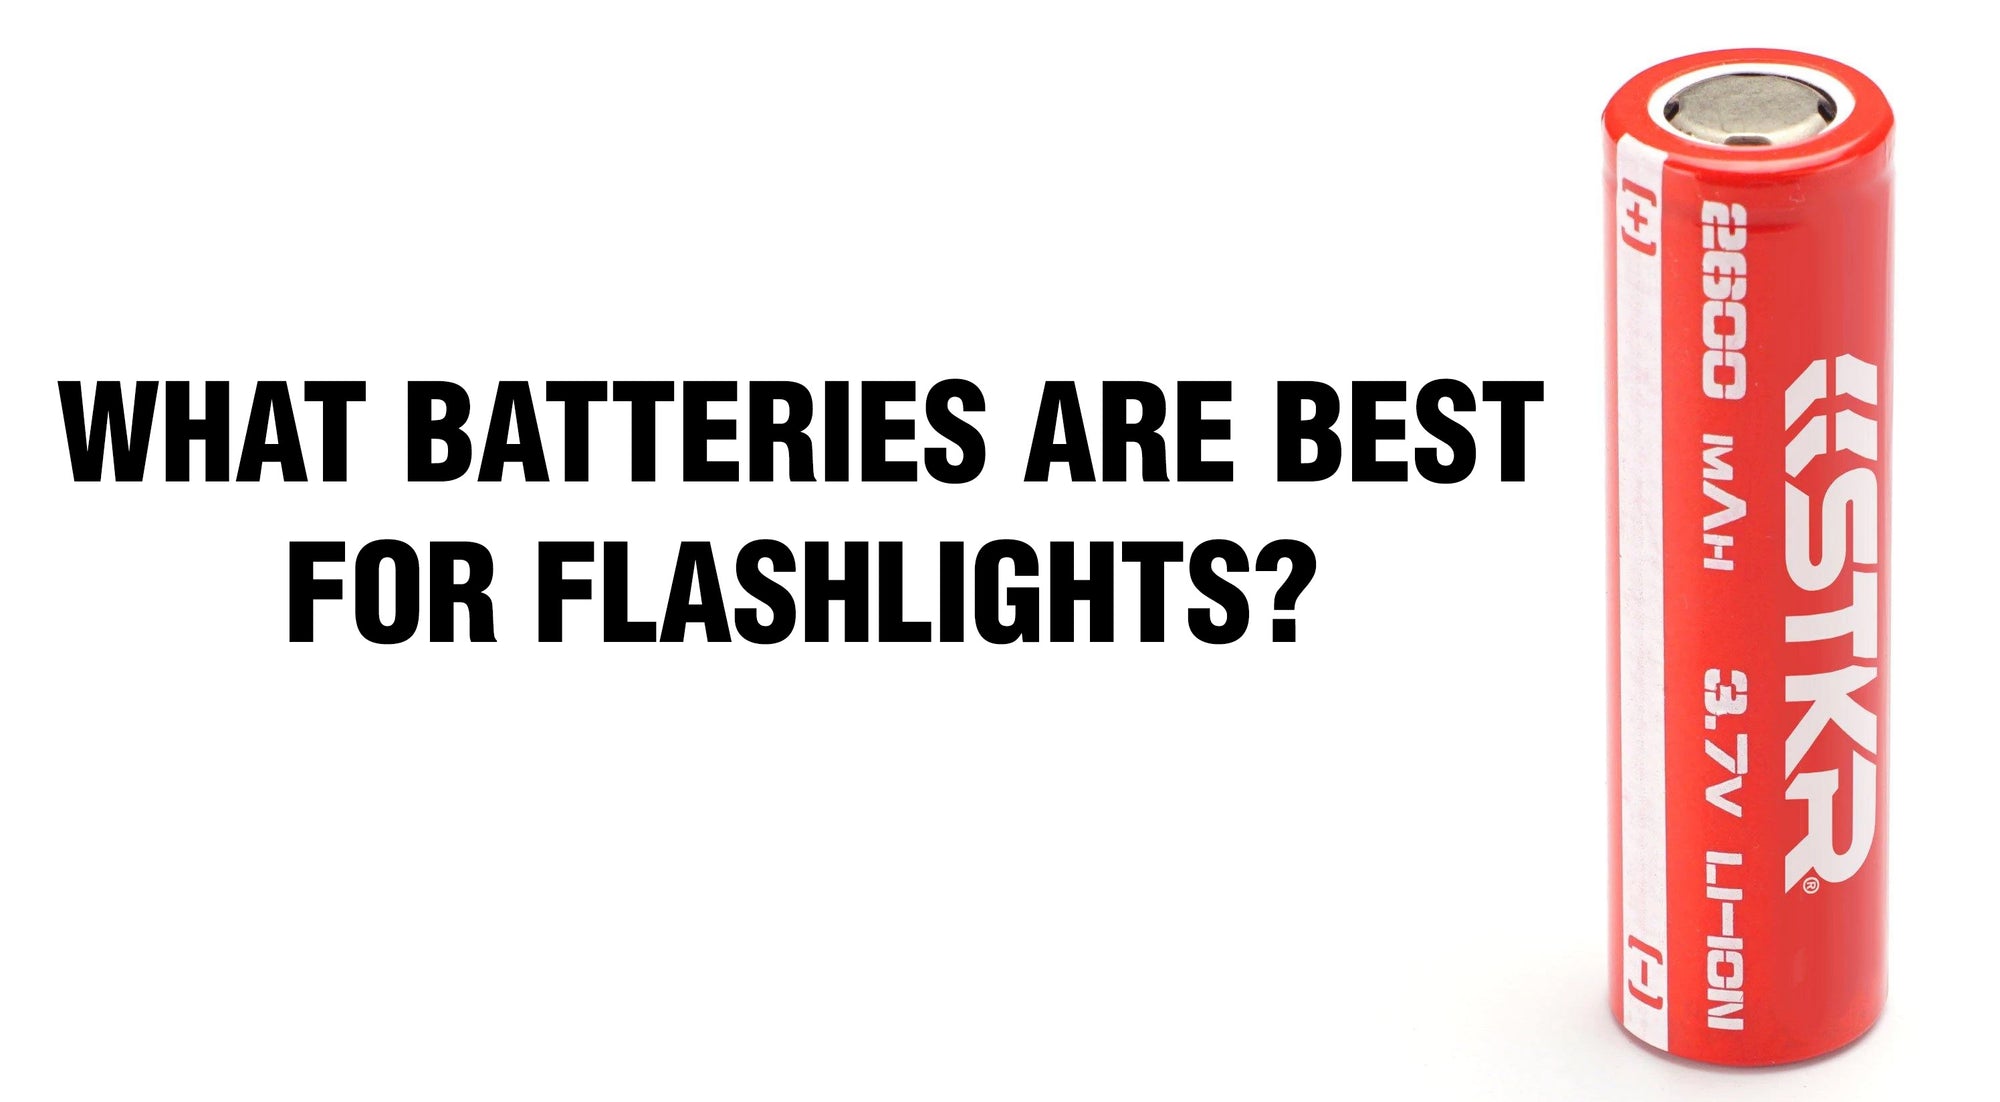 What Batteries are Best for Flashlights?